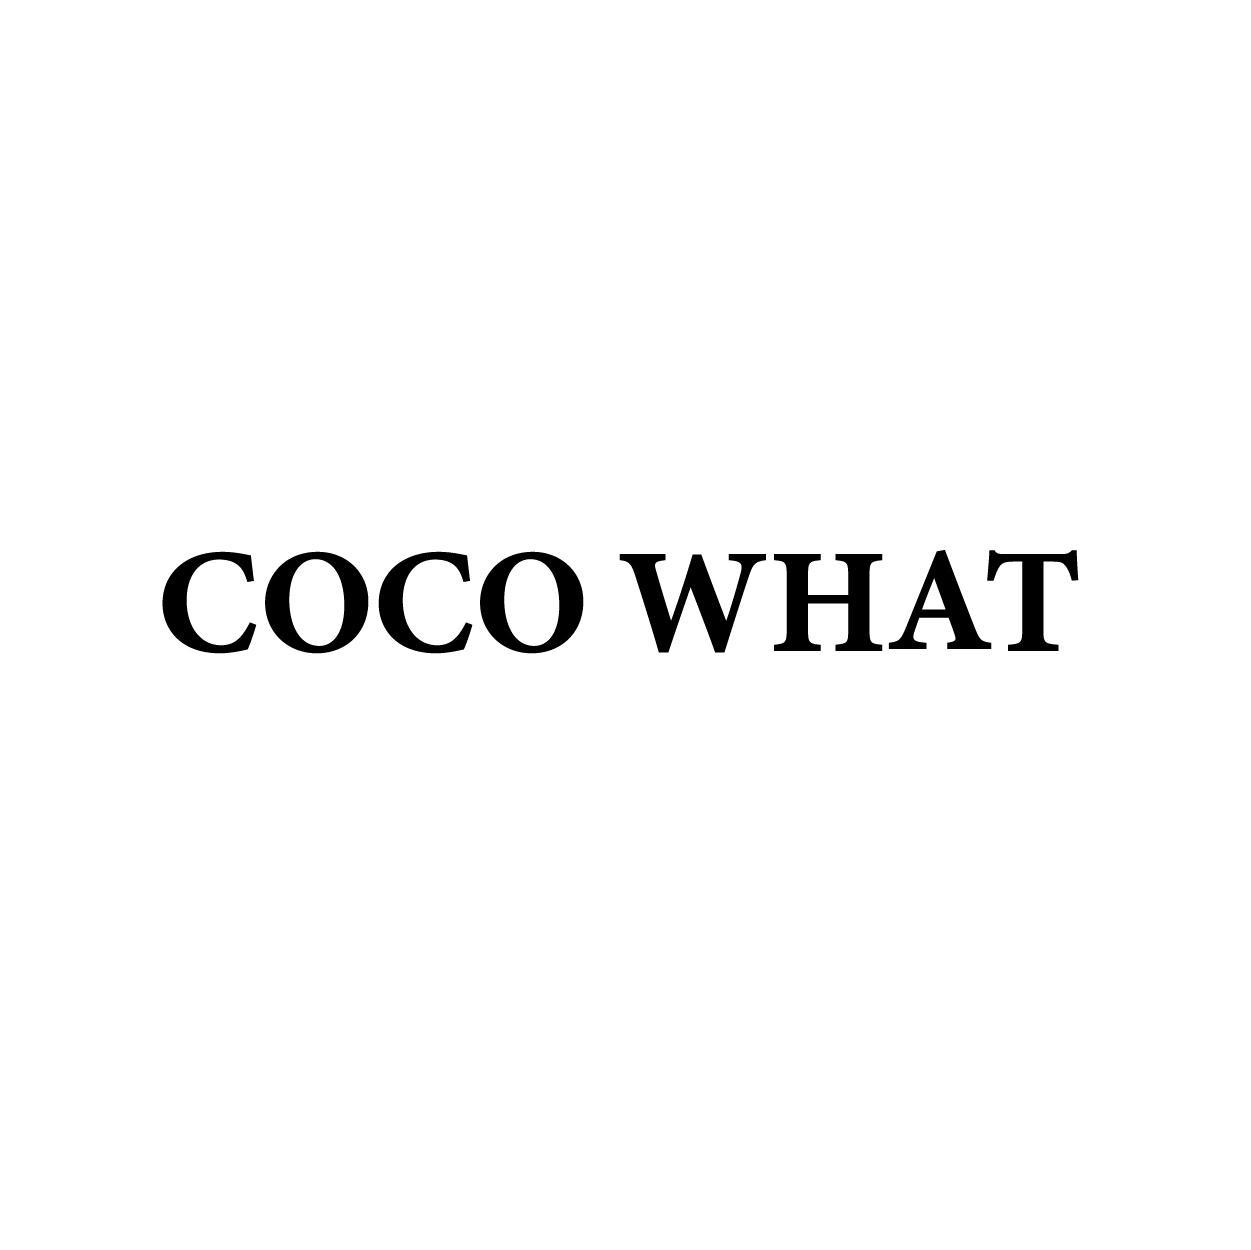 COCO WHAT